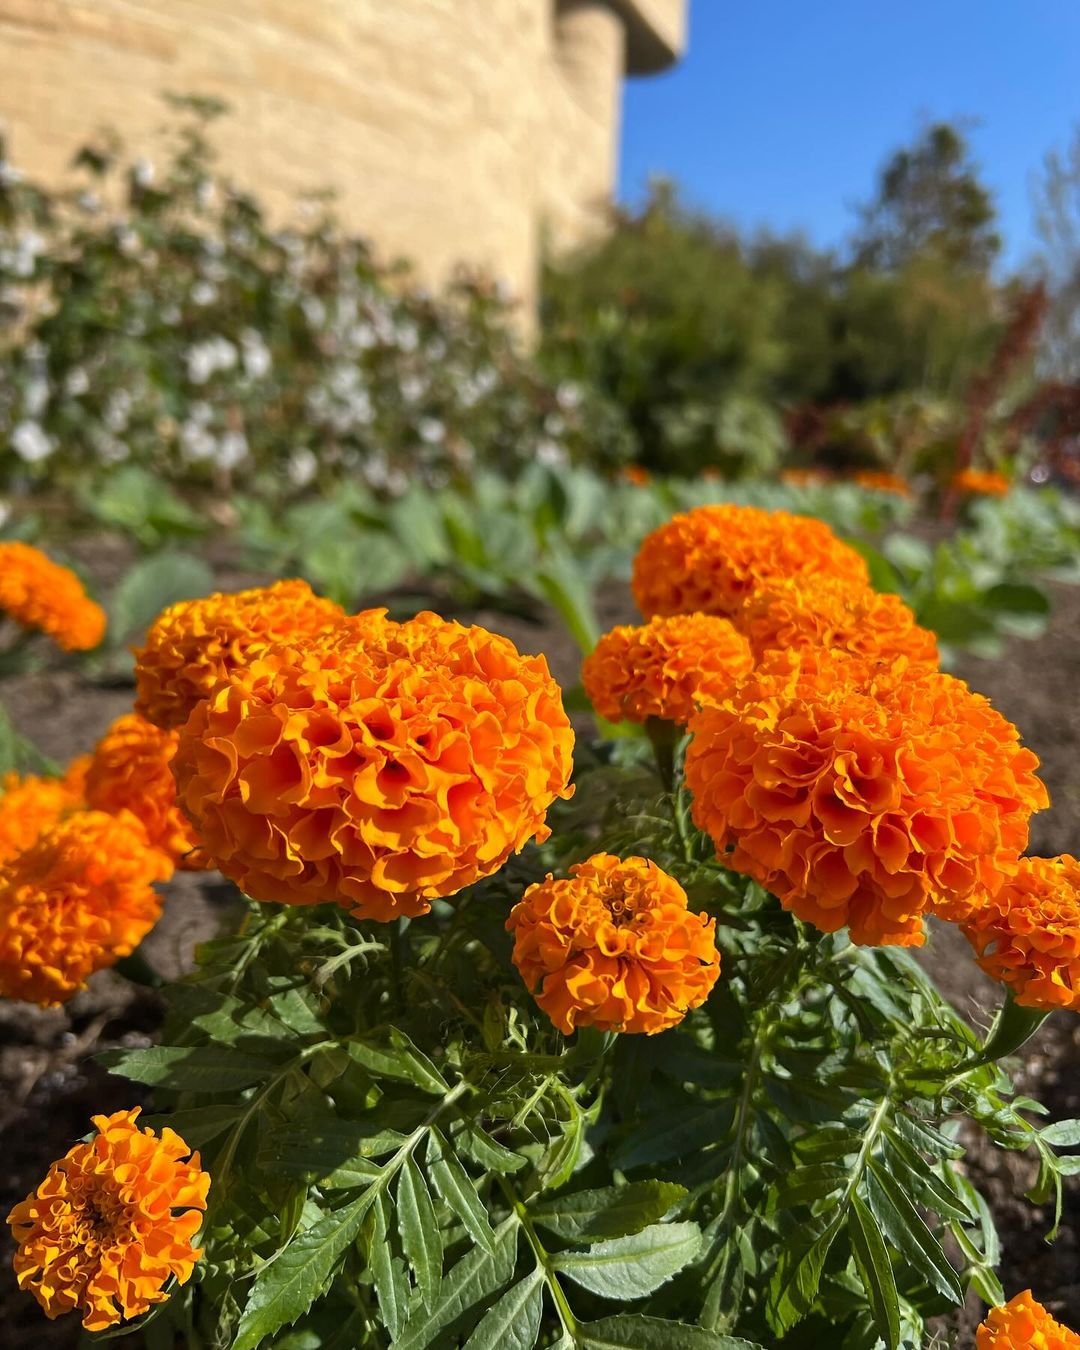 Marigold (Tagetes spp.) - vibrant orange and yellow flowers with dark green foliage.
